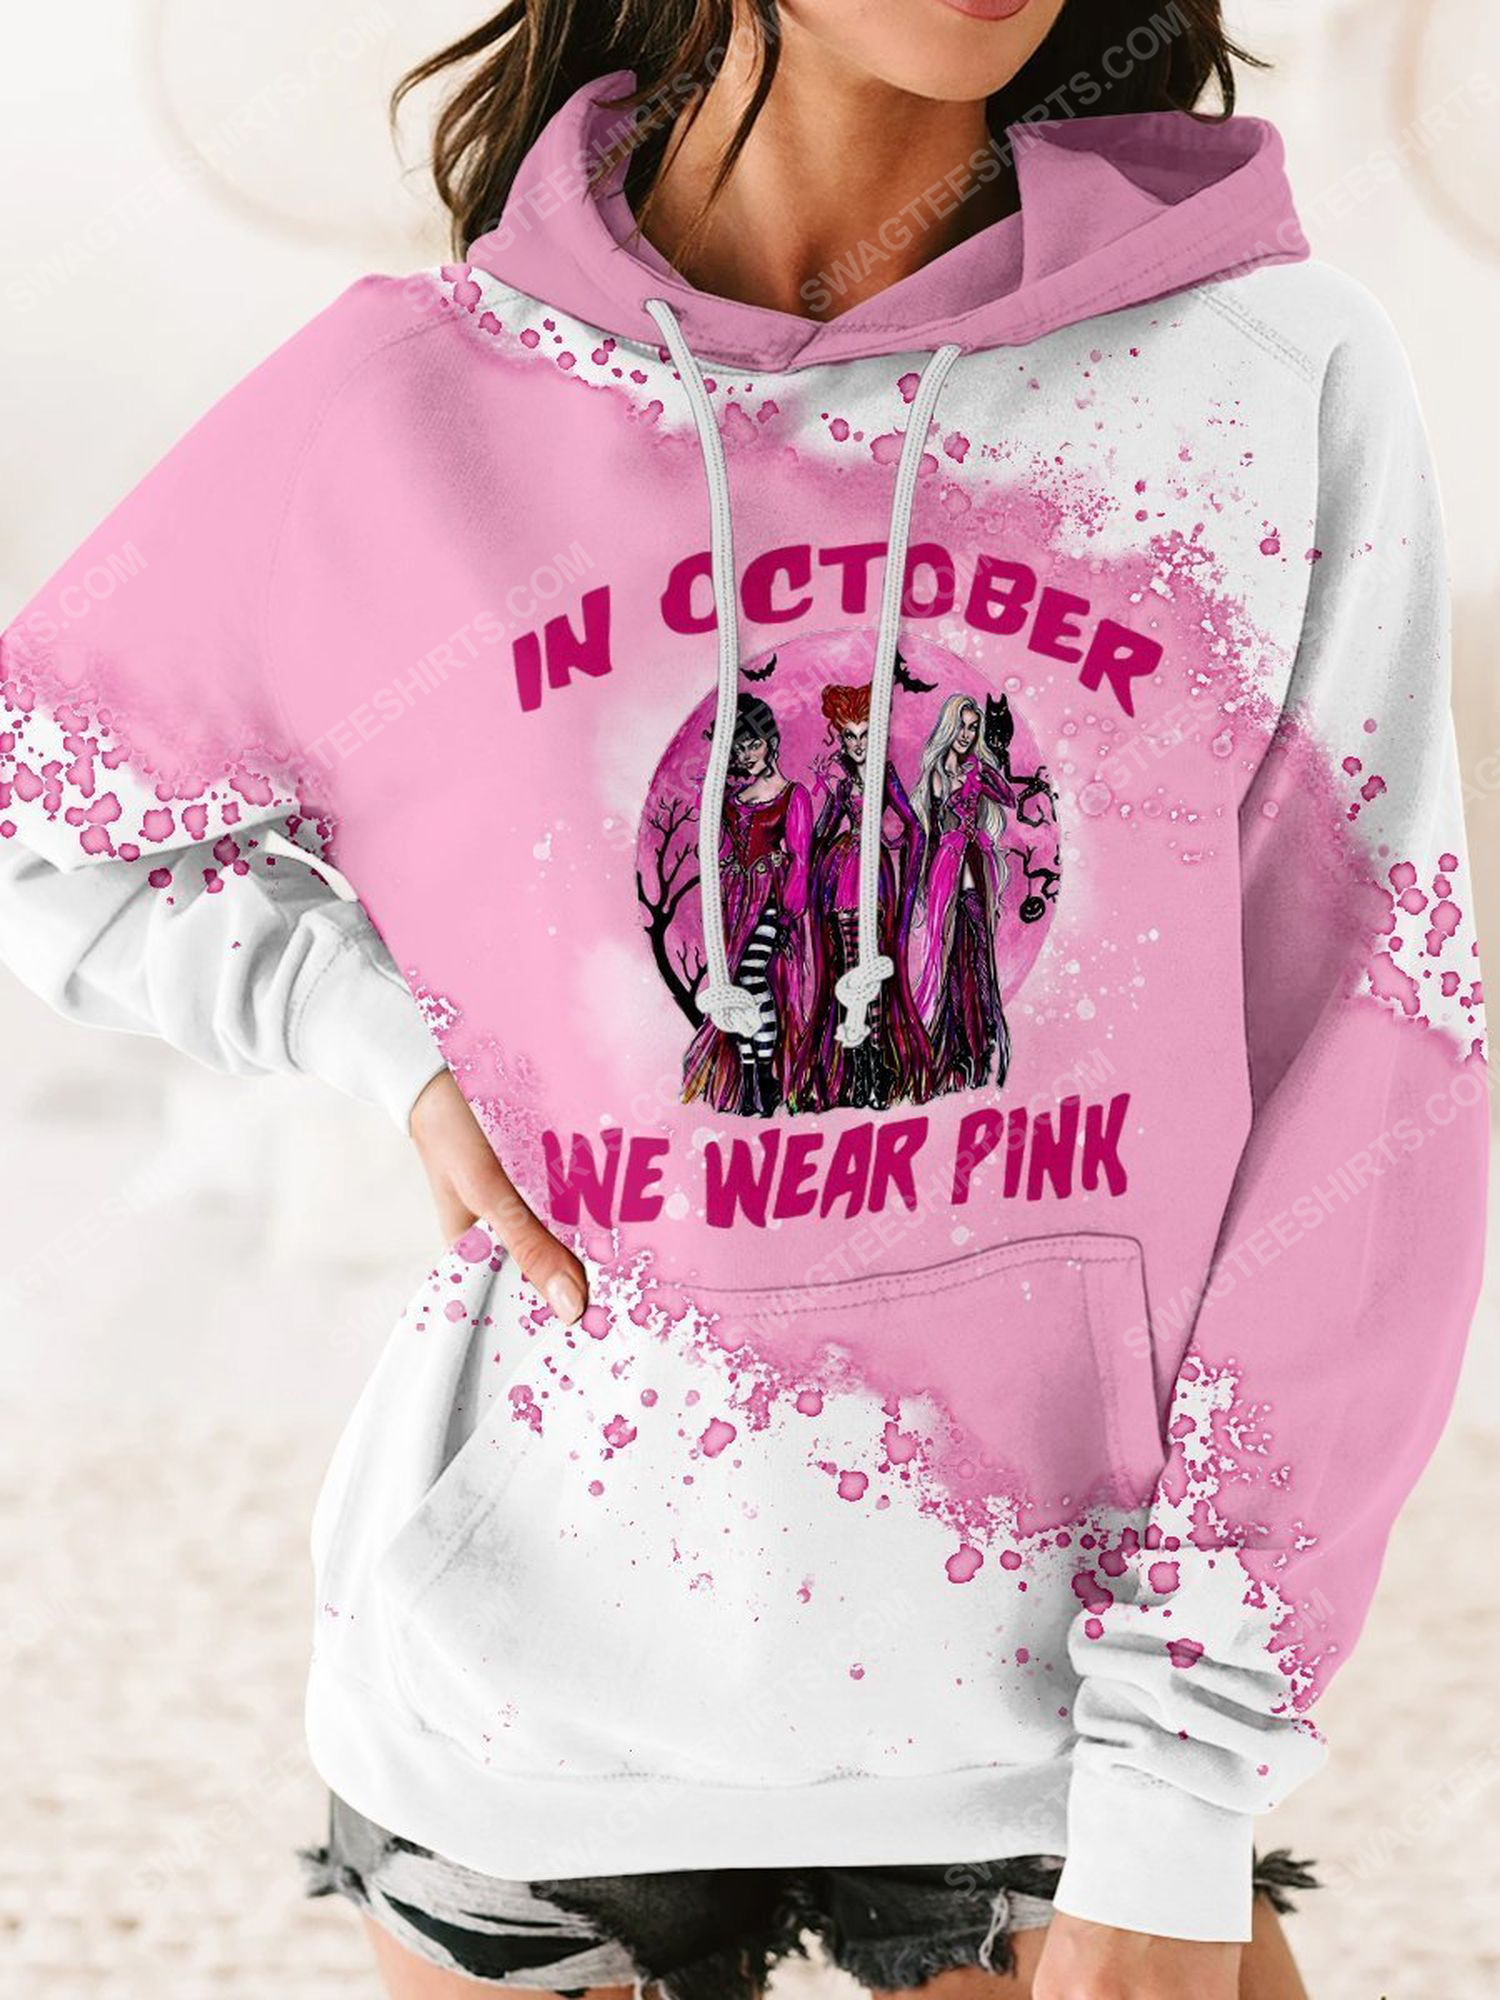 Breast cancer in october we wear pink hocus pocus witch full print shirt 1 - Copy (2)